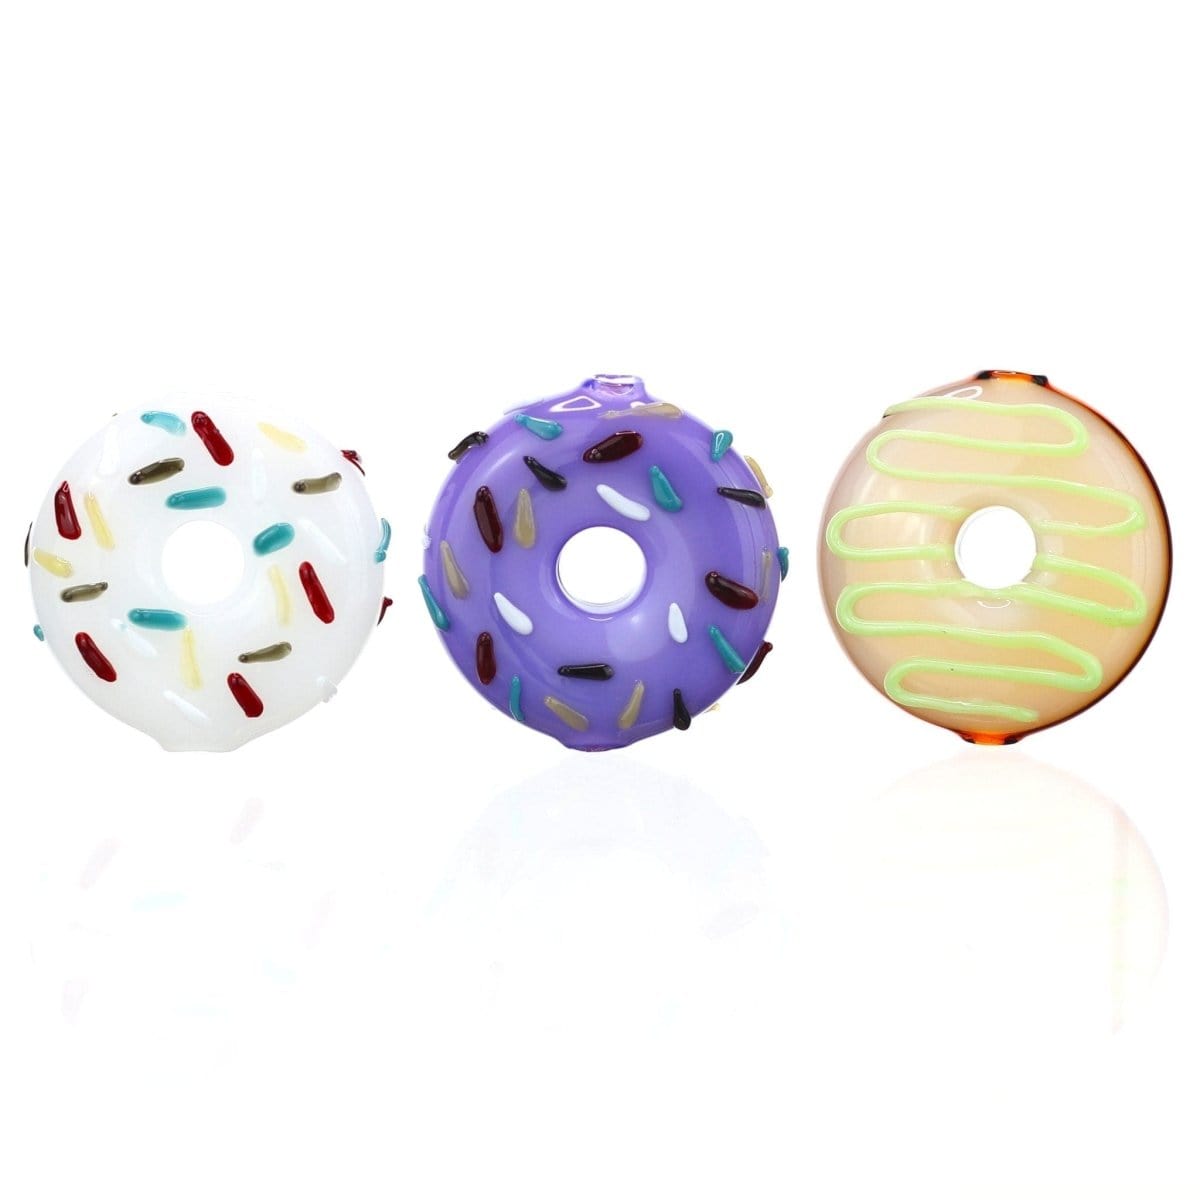 Daily High Club Glass Daily High Club "Donut" Blunt/Joint Holder + Pendant